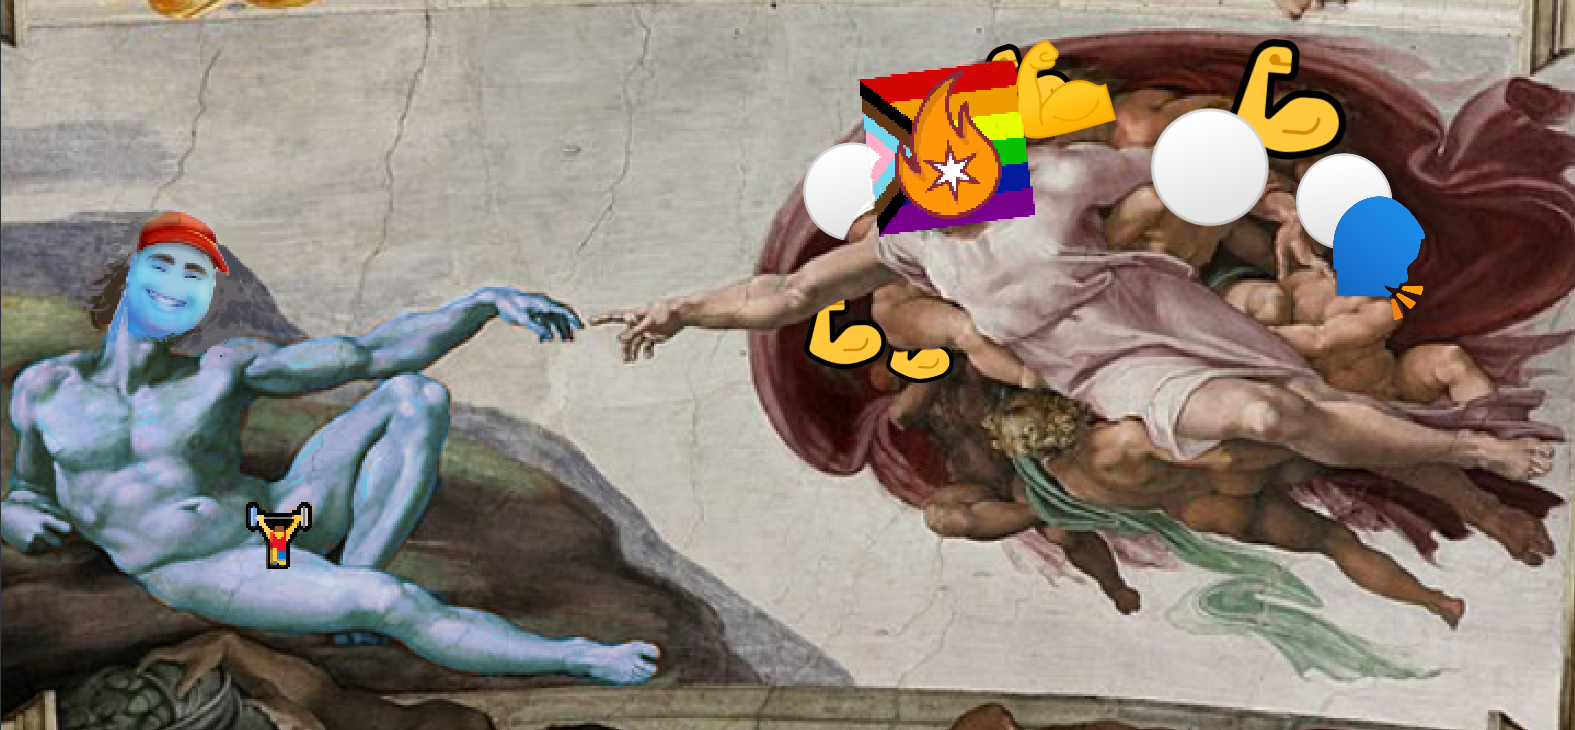 ID: The Creation of Adam by Michelangelo, edited so that Goobie Ballson is Adam, censored by the weightlifter emoji. The Chicago Firefighters take the place of God, while muscles and orbs take the place of the cherubs.